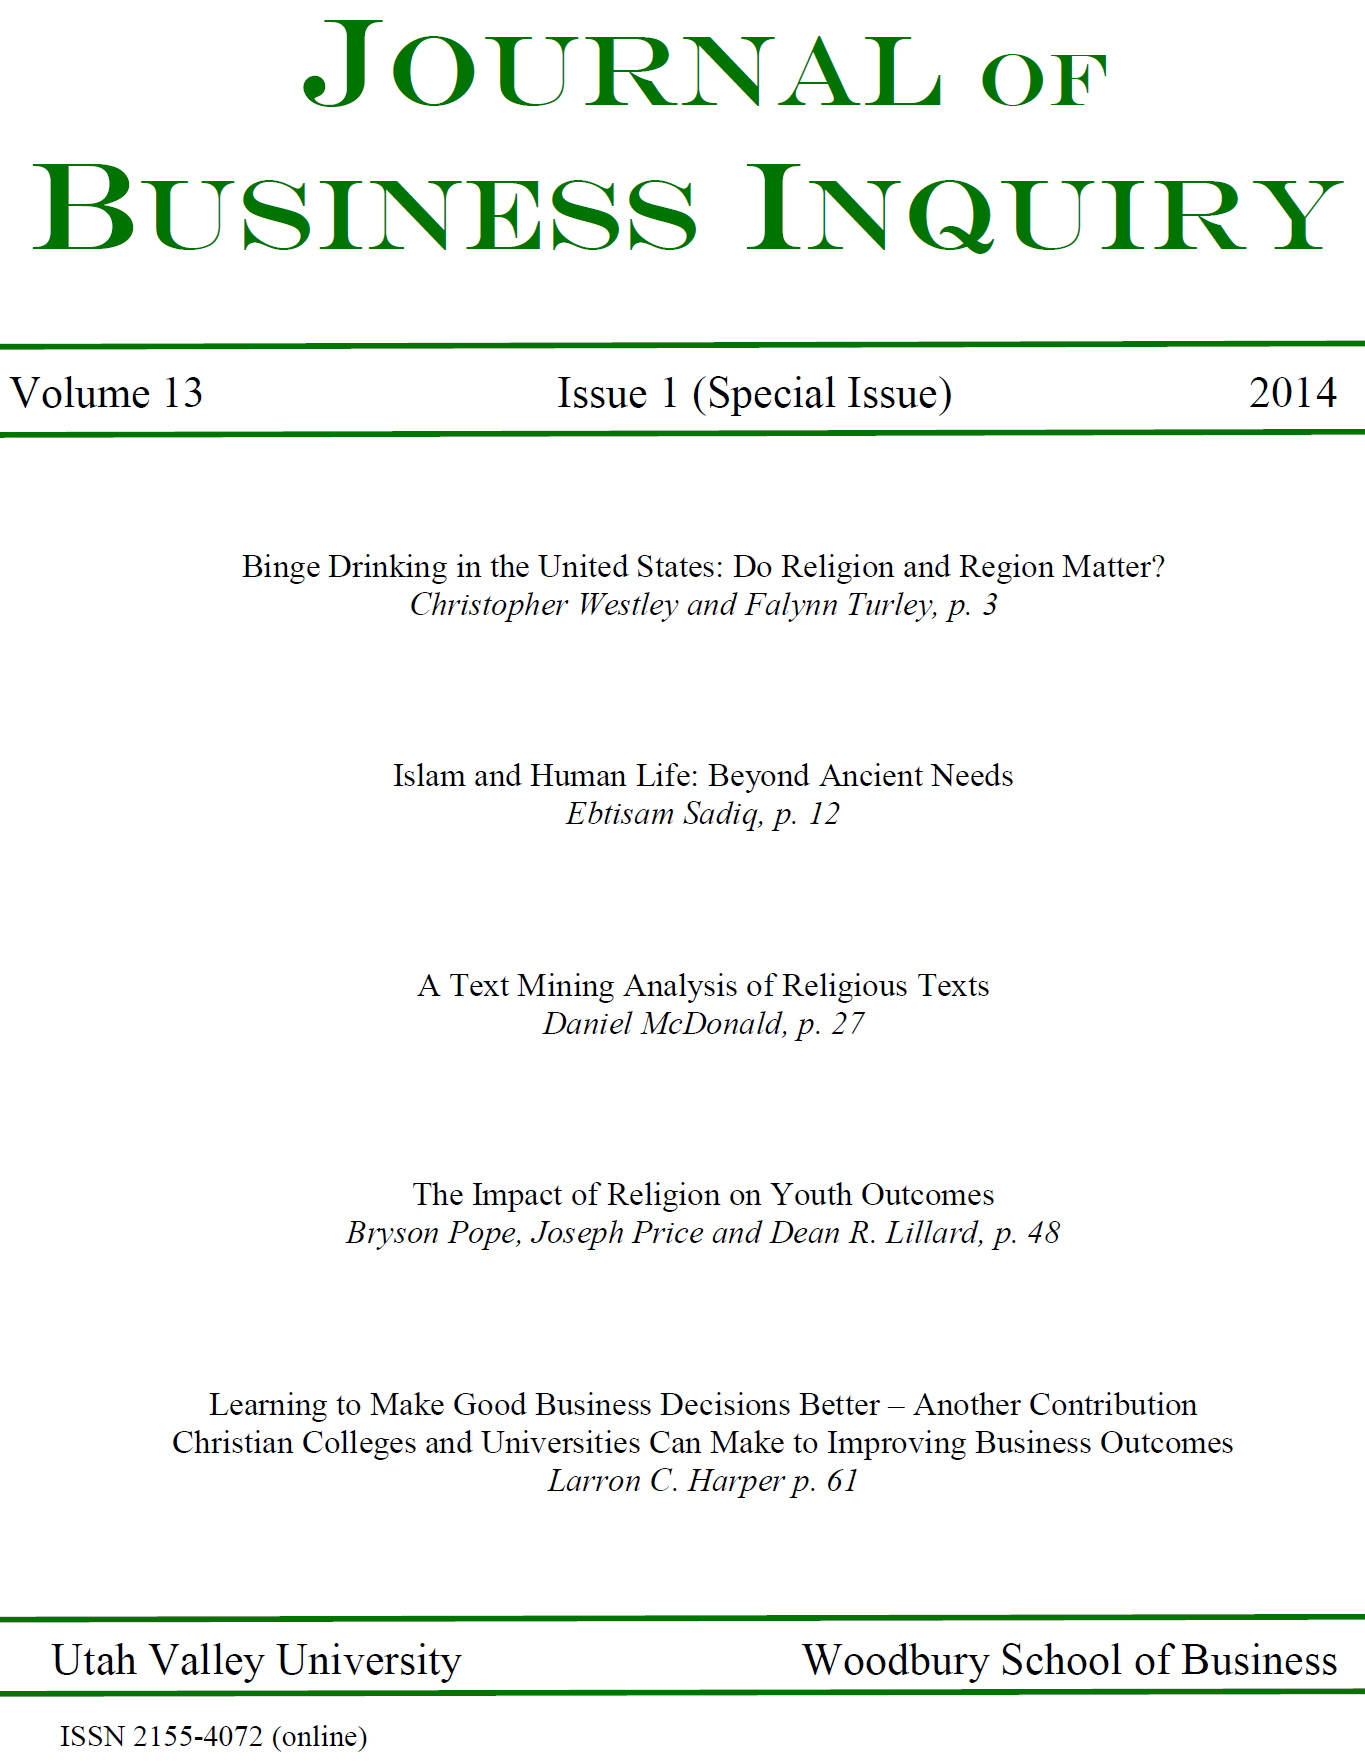 					View Vol. 13 No. 1 (2014): The Journal of Business Inquiry
				